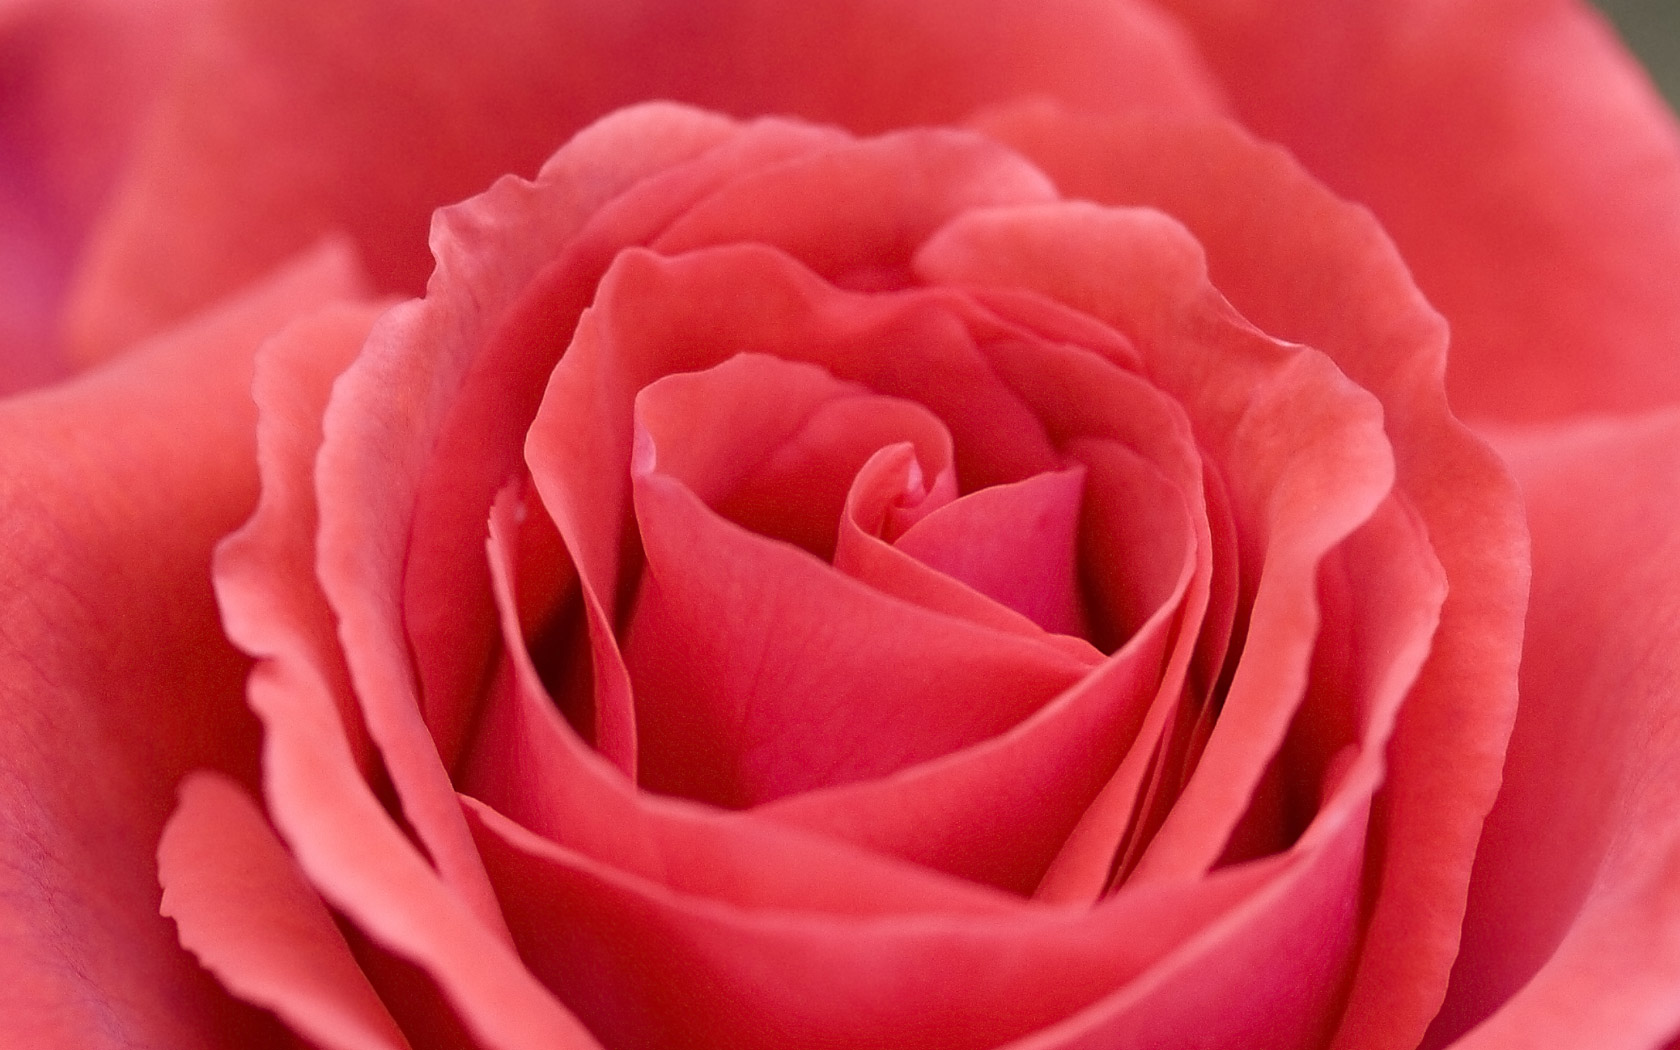 Desktop background of a beautiful large soft red rose bloom